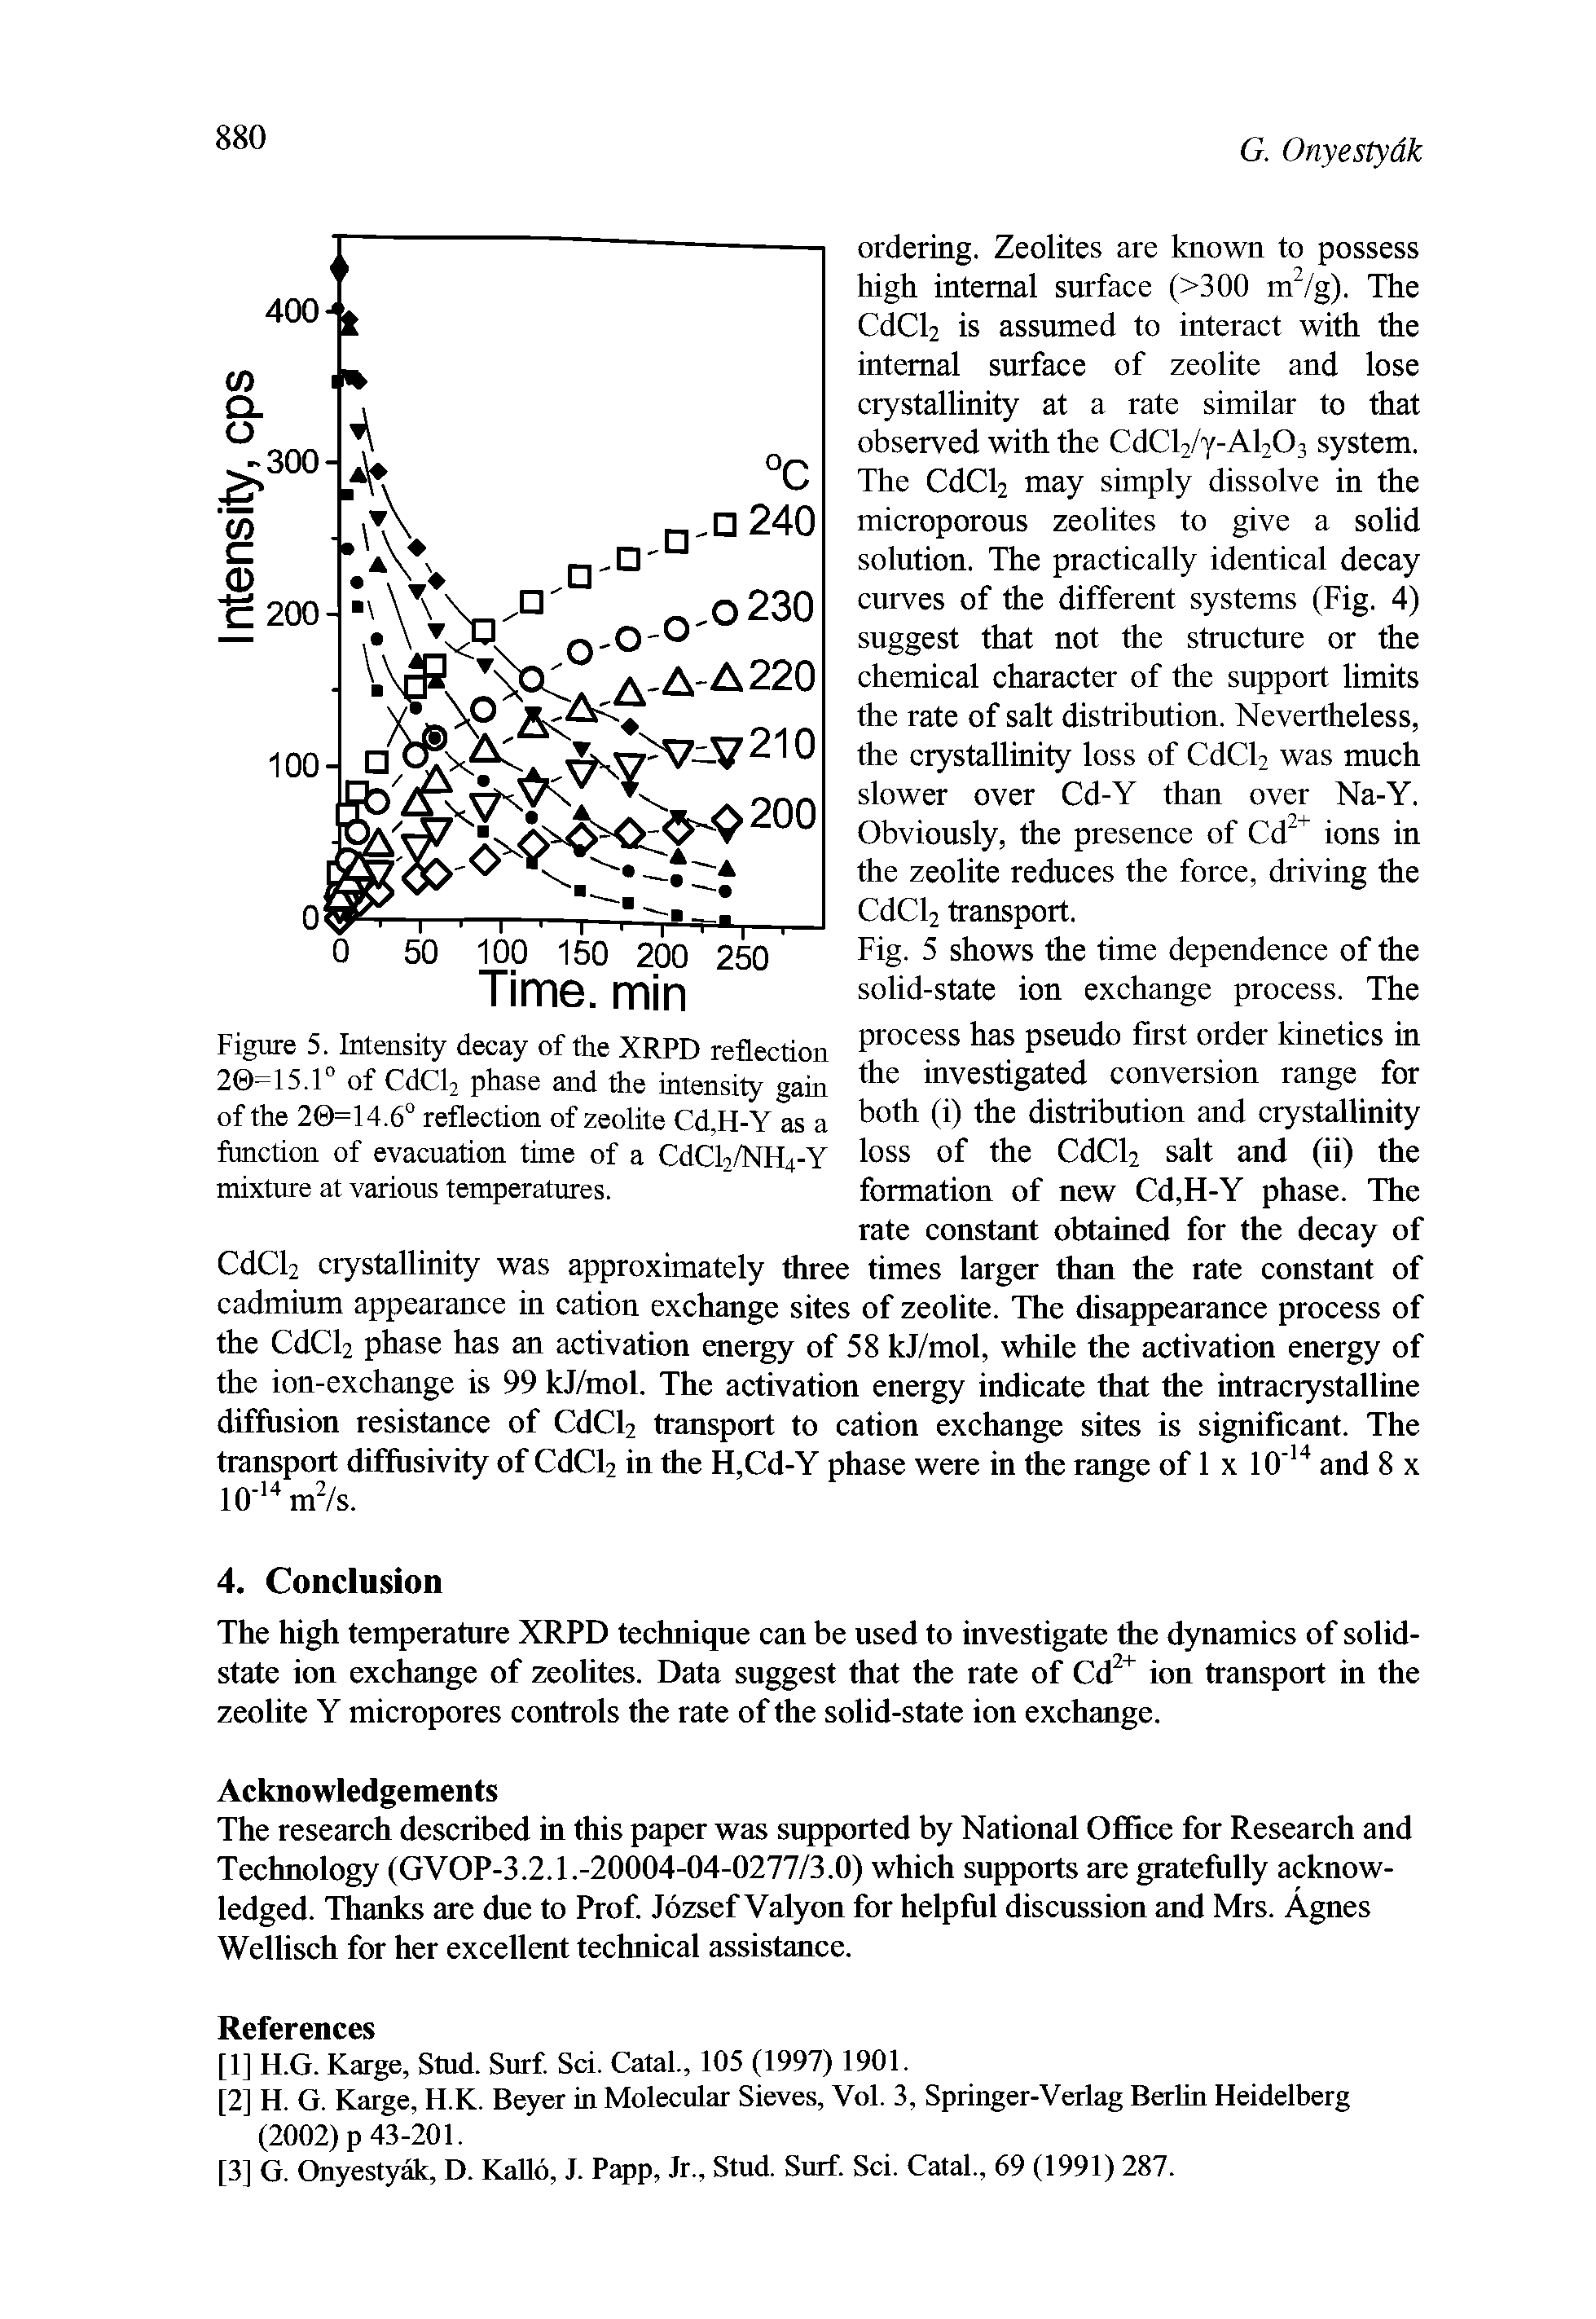 Figure 5. Intensity decay of the XRPD reflection 20=15.1° of CdCl2 phase and the intensity gain of the 20=14.6° reflection of zeolite Cd,H-Y as a function of evacuation time of a CdCl2/NH4-Y mixture at various temperatures.